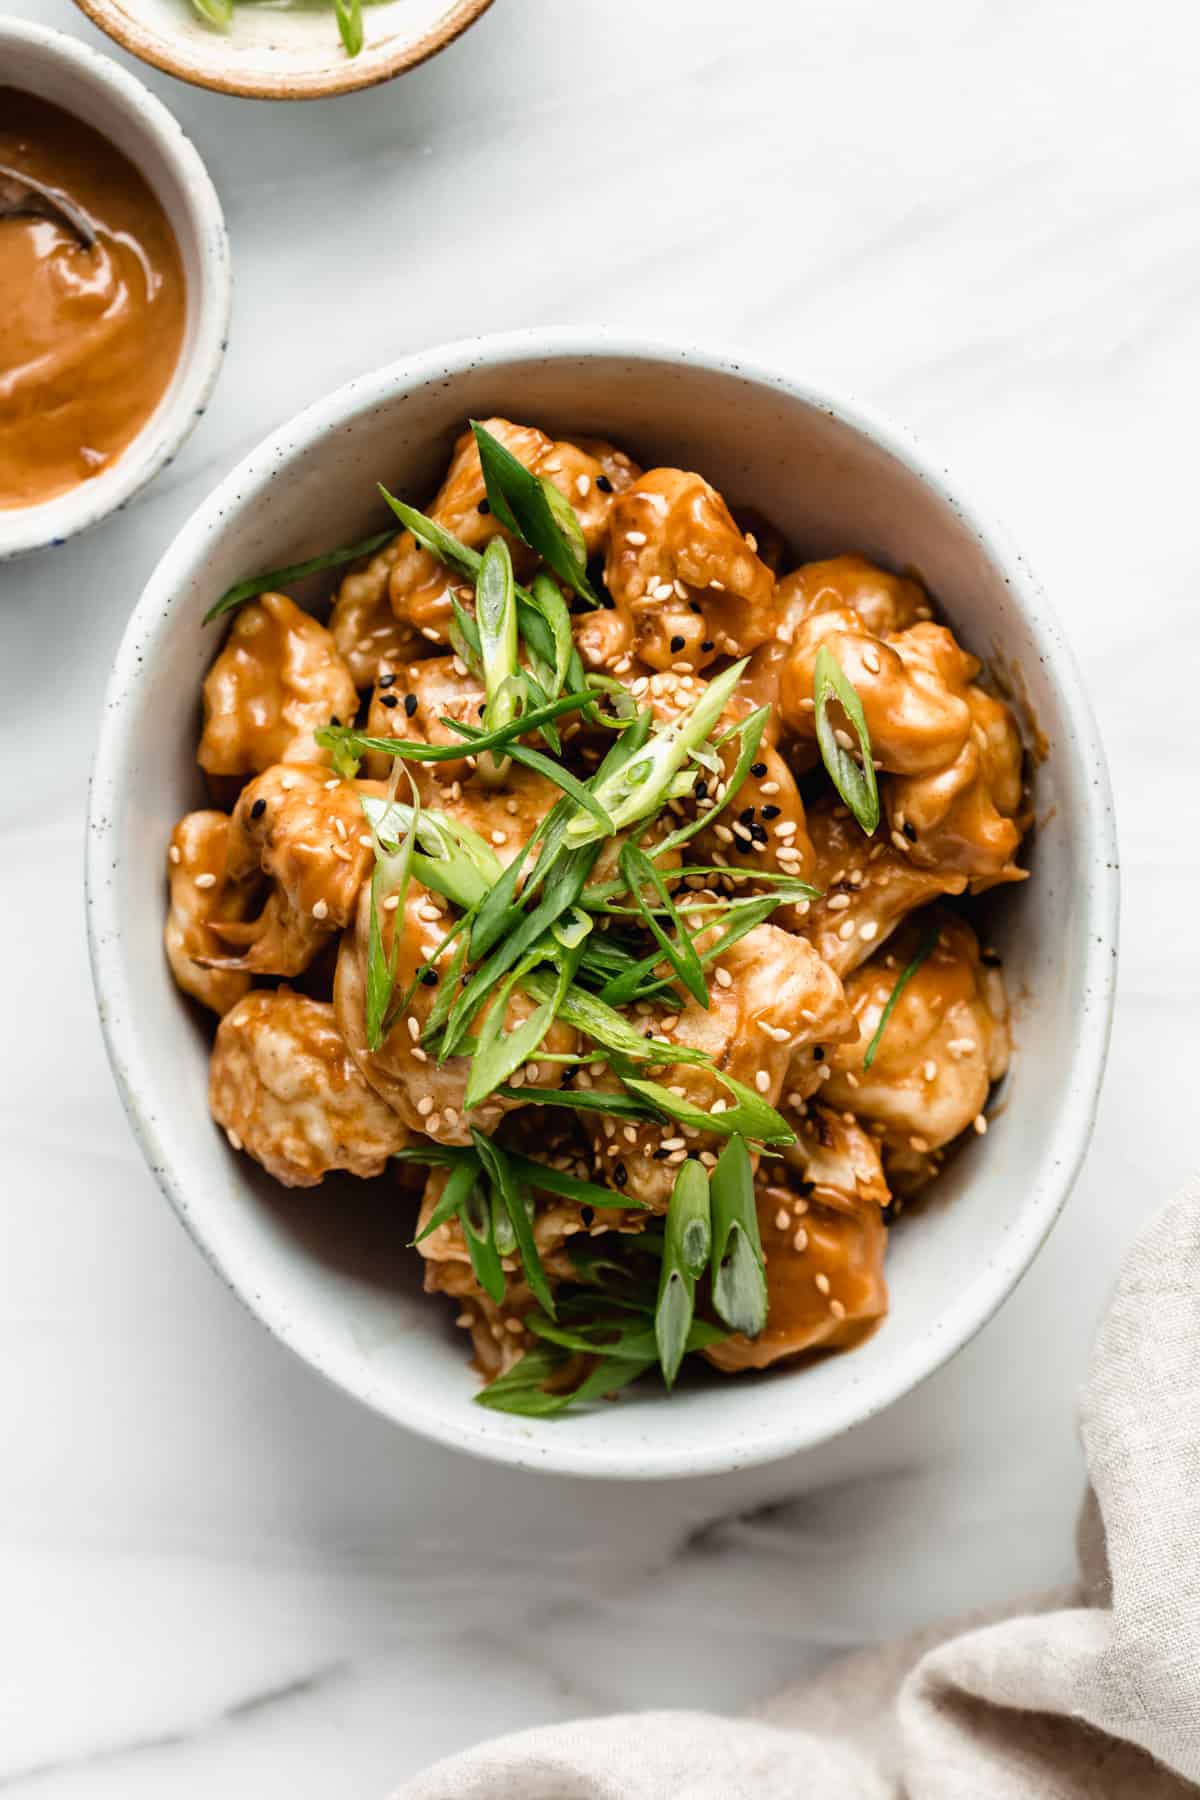 A bowl of Thai cauliflower wings topped with green onions and sesame seeds